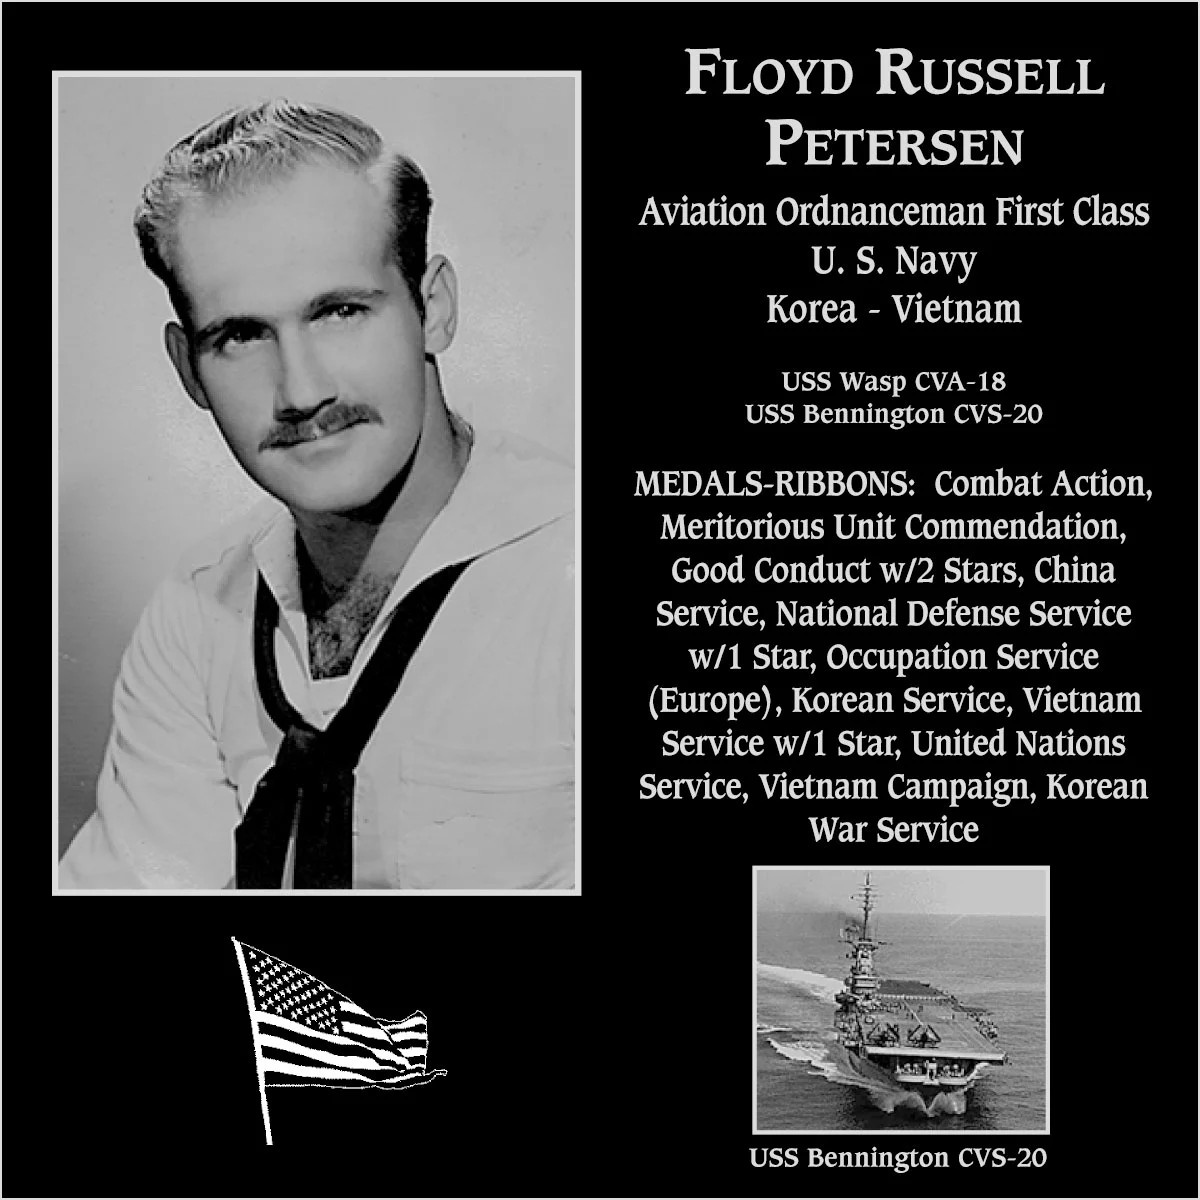 Floyd Russell Peterson